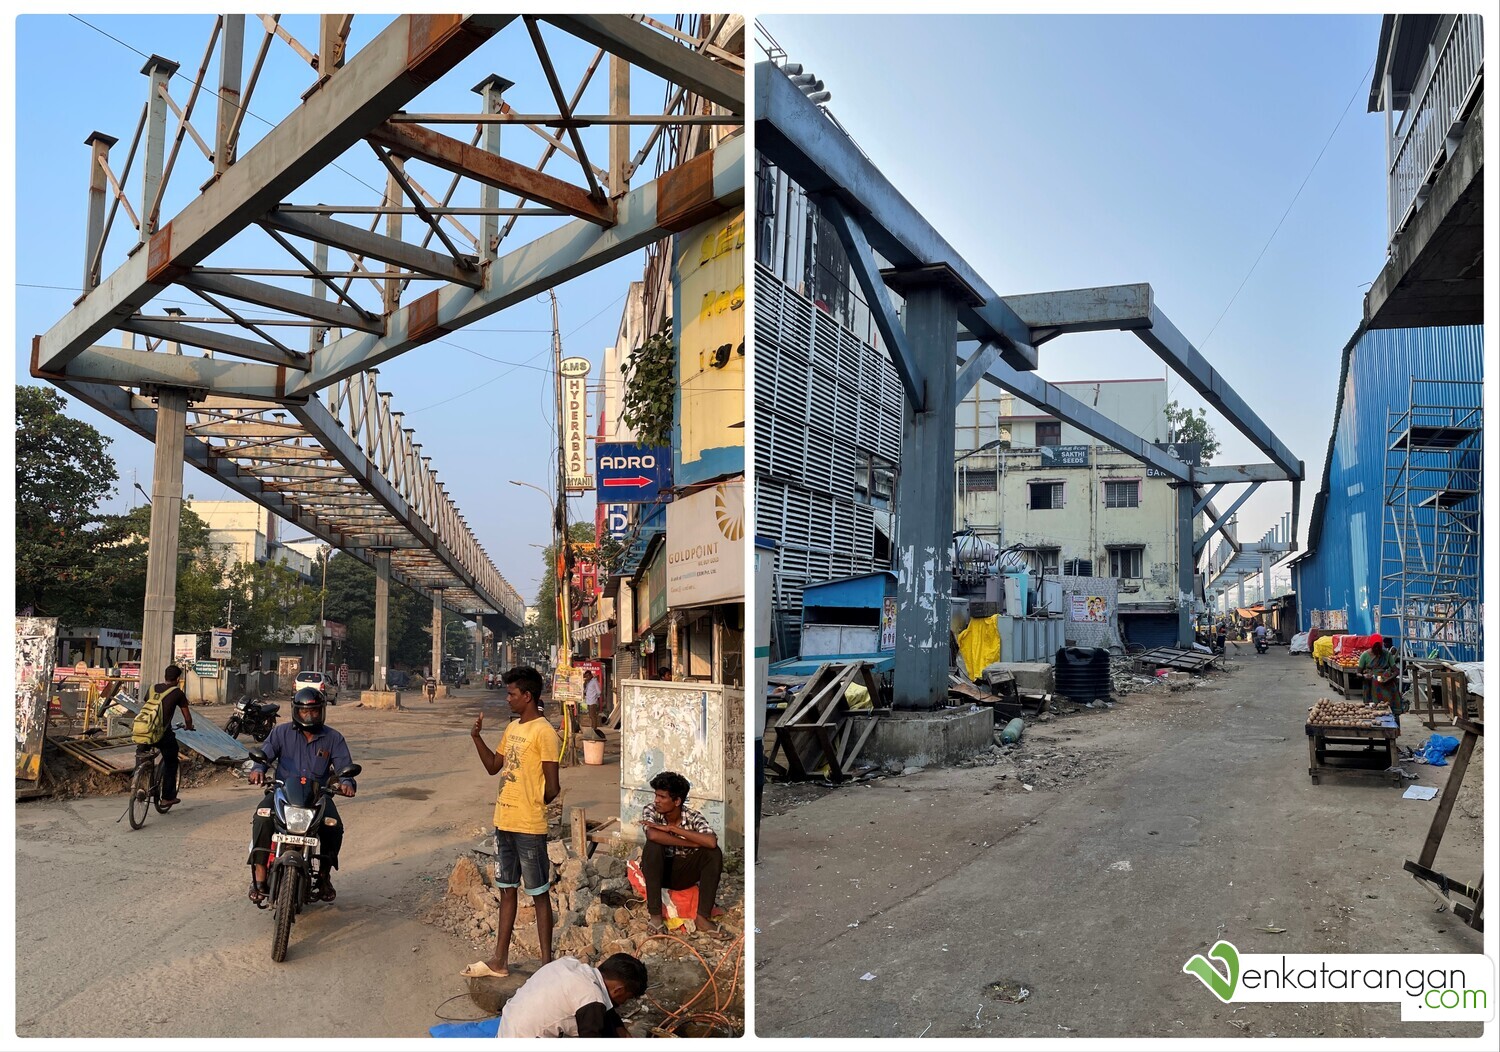 A view of the under-construction INR 300 crores Skybridge for pedestrians walking between the T.Nagar bus terminus and the Mambalam Railway station, avoiding the crowd on the shopping district below